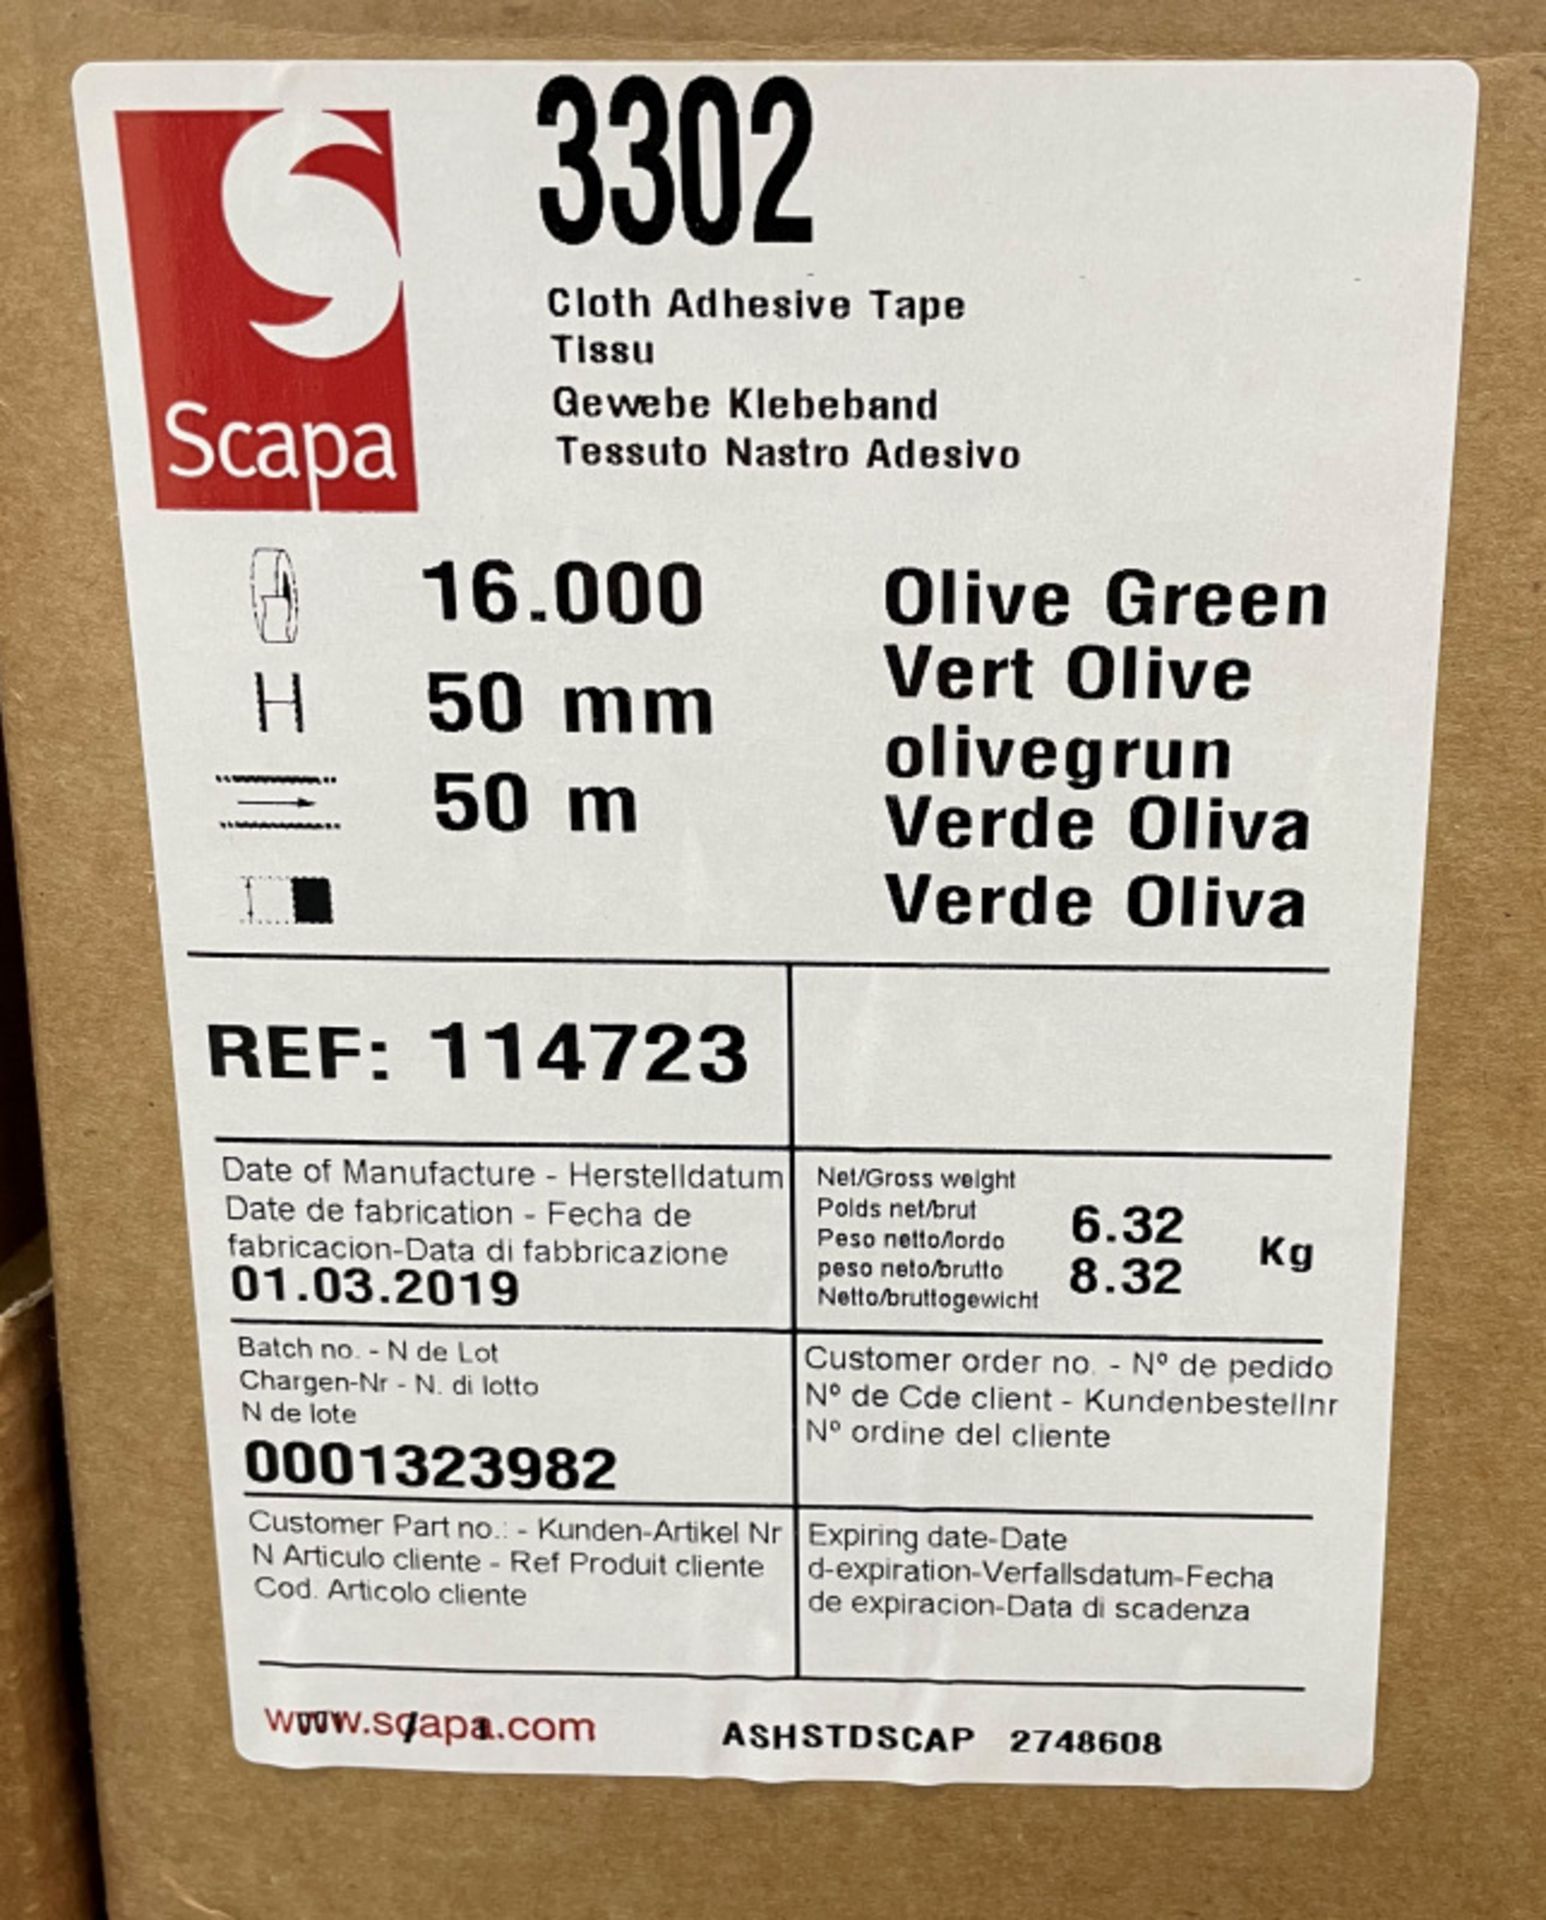 Scapa 3302 Tape - Olive Green - 50mm x 50M rolls - 16 rolls per box - 33 boxes - Image 6 of 7